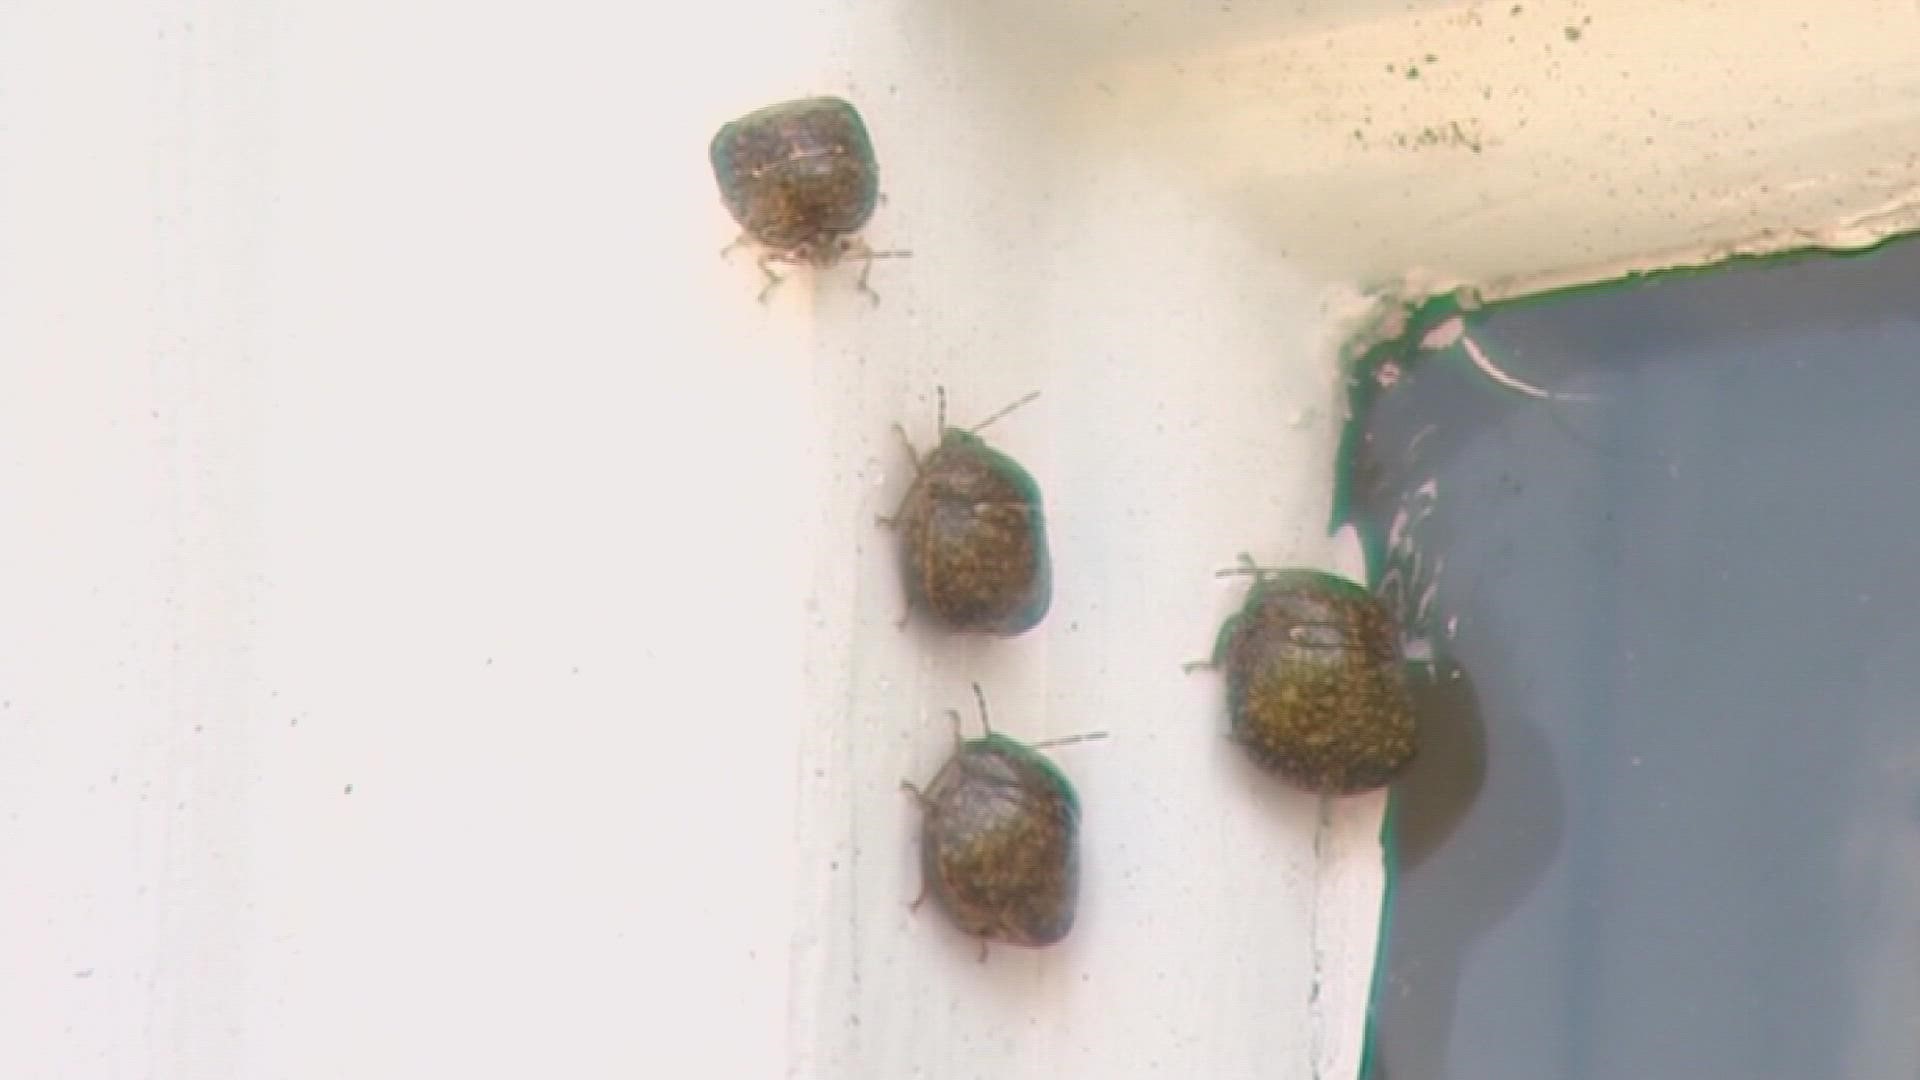 McNeely Pest Control shares ways to keep annoying insects like stink bugs out of your house.